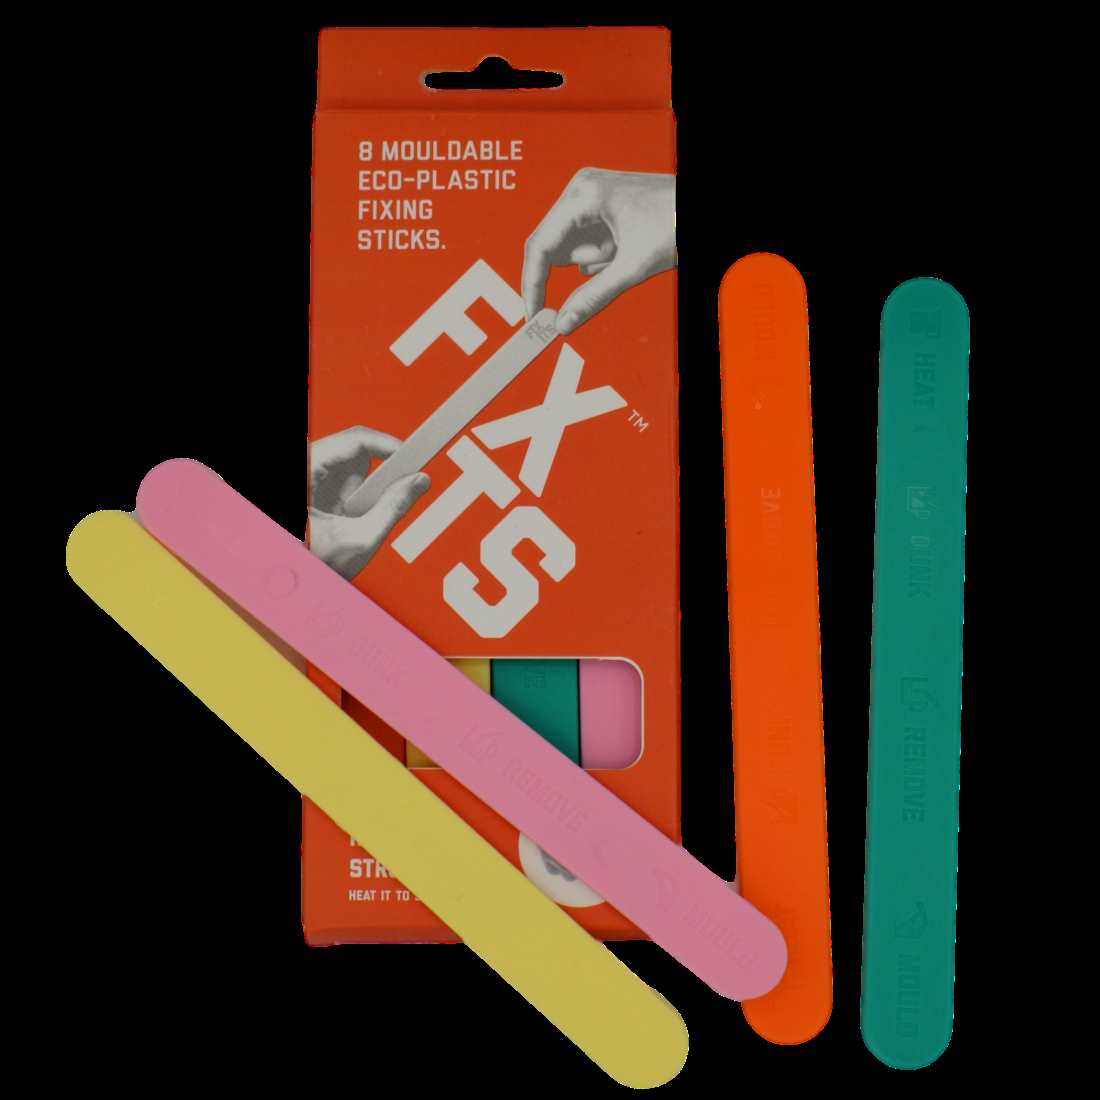 FixIts, Moldable Eco-Plastic Fixing Sticks- also now available in black or white | Green Alternatives